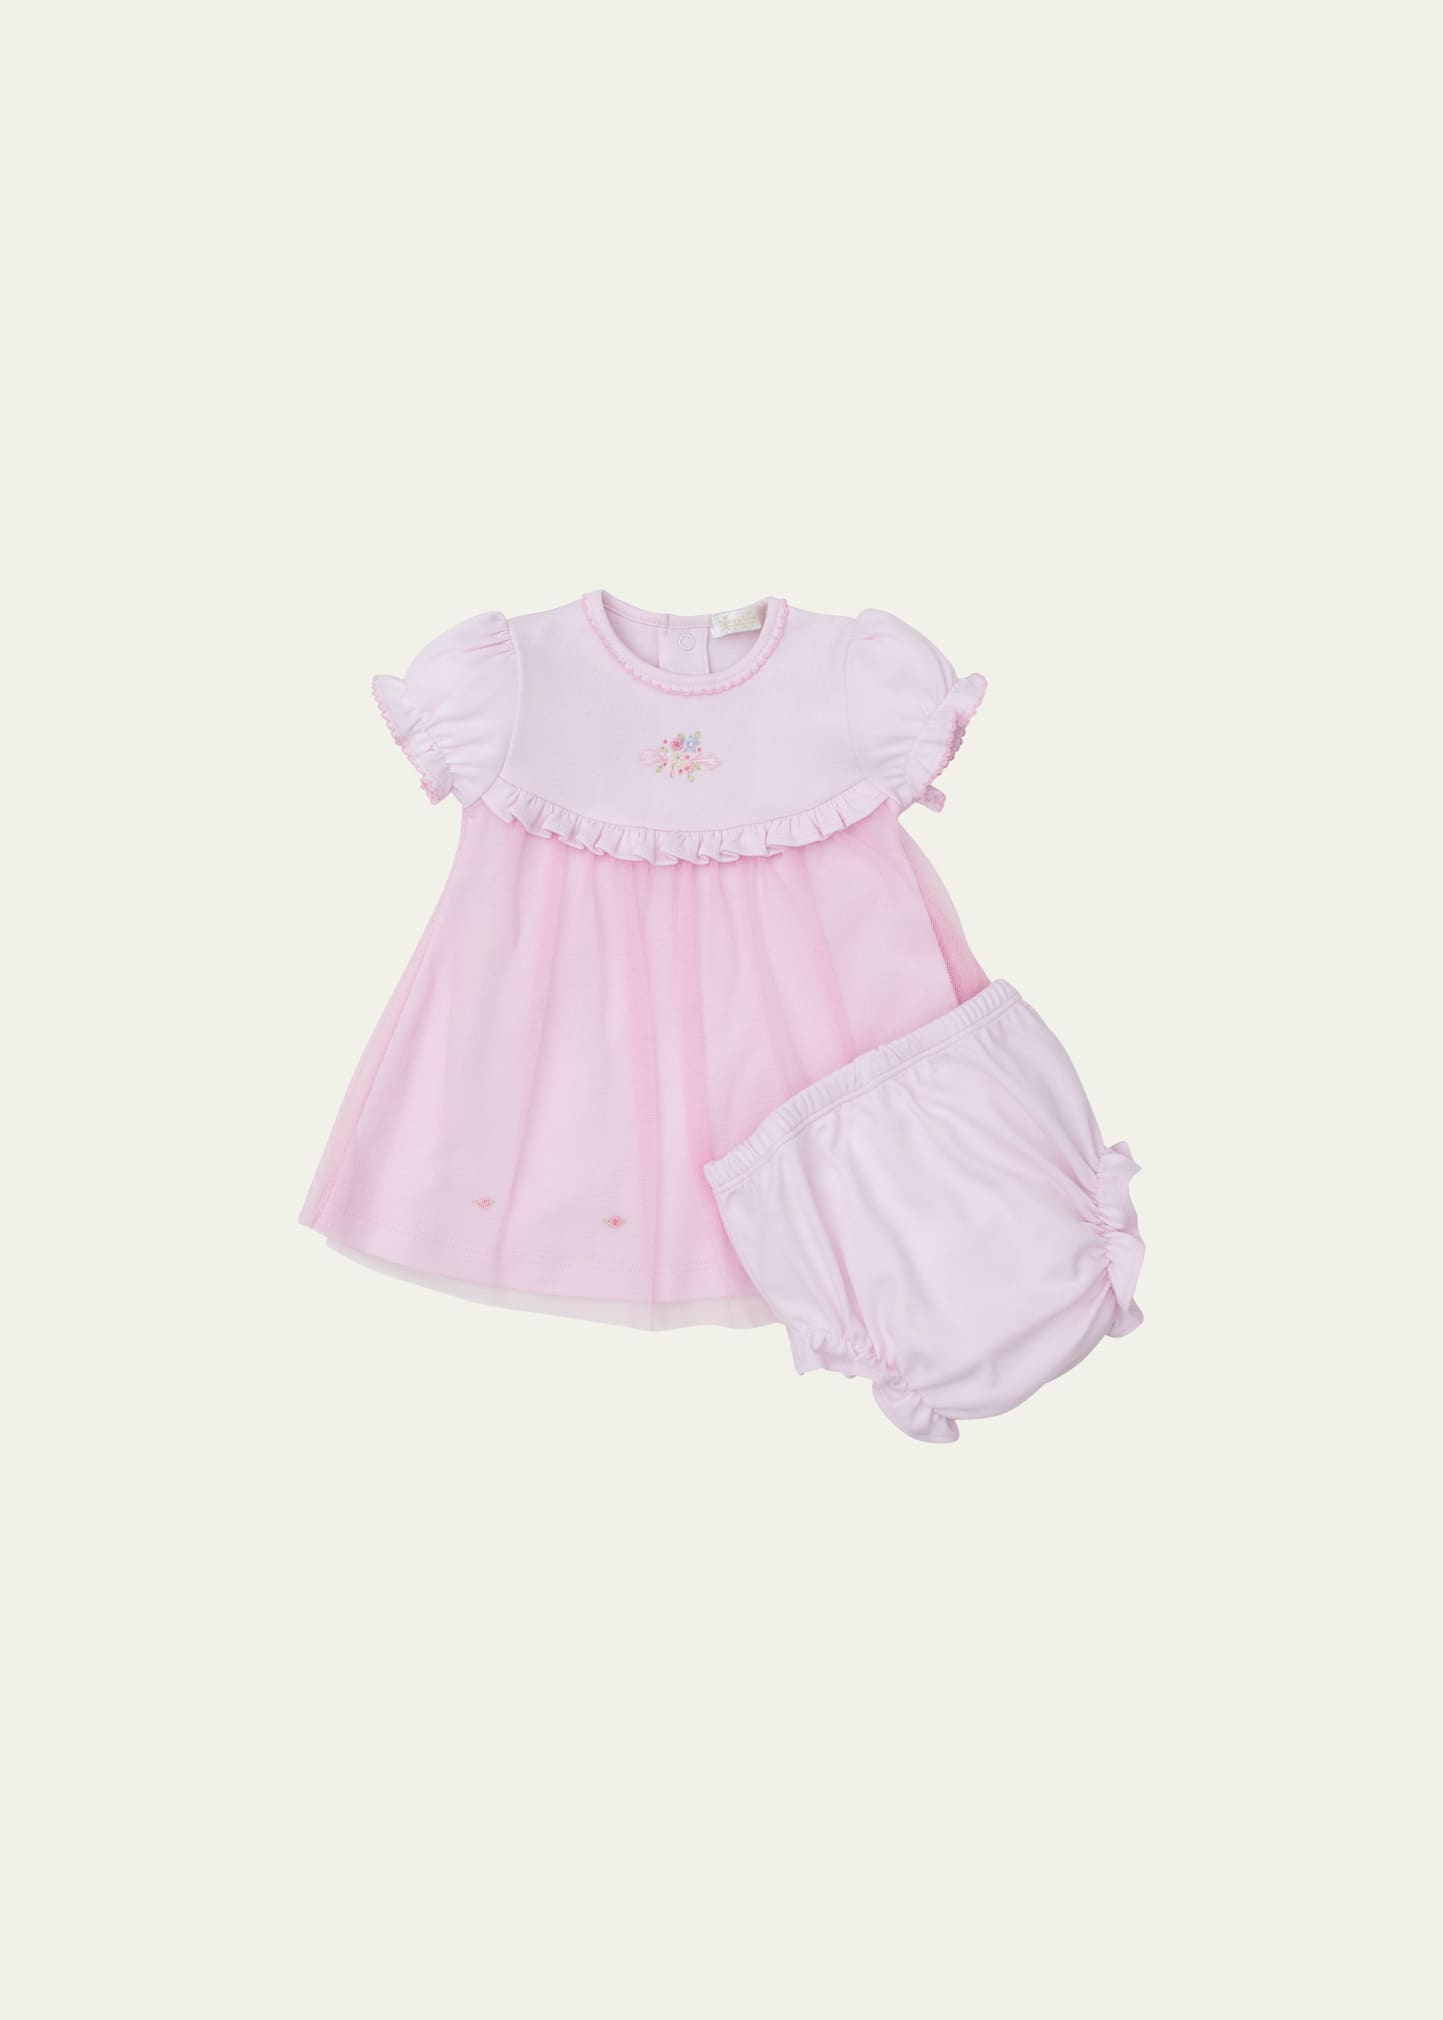 Girl's Blooming Sprays Dress with Bloomers, Size Newborn-18M